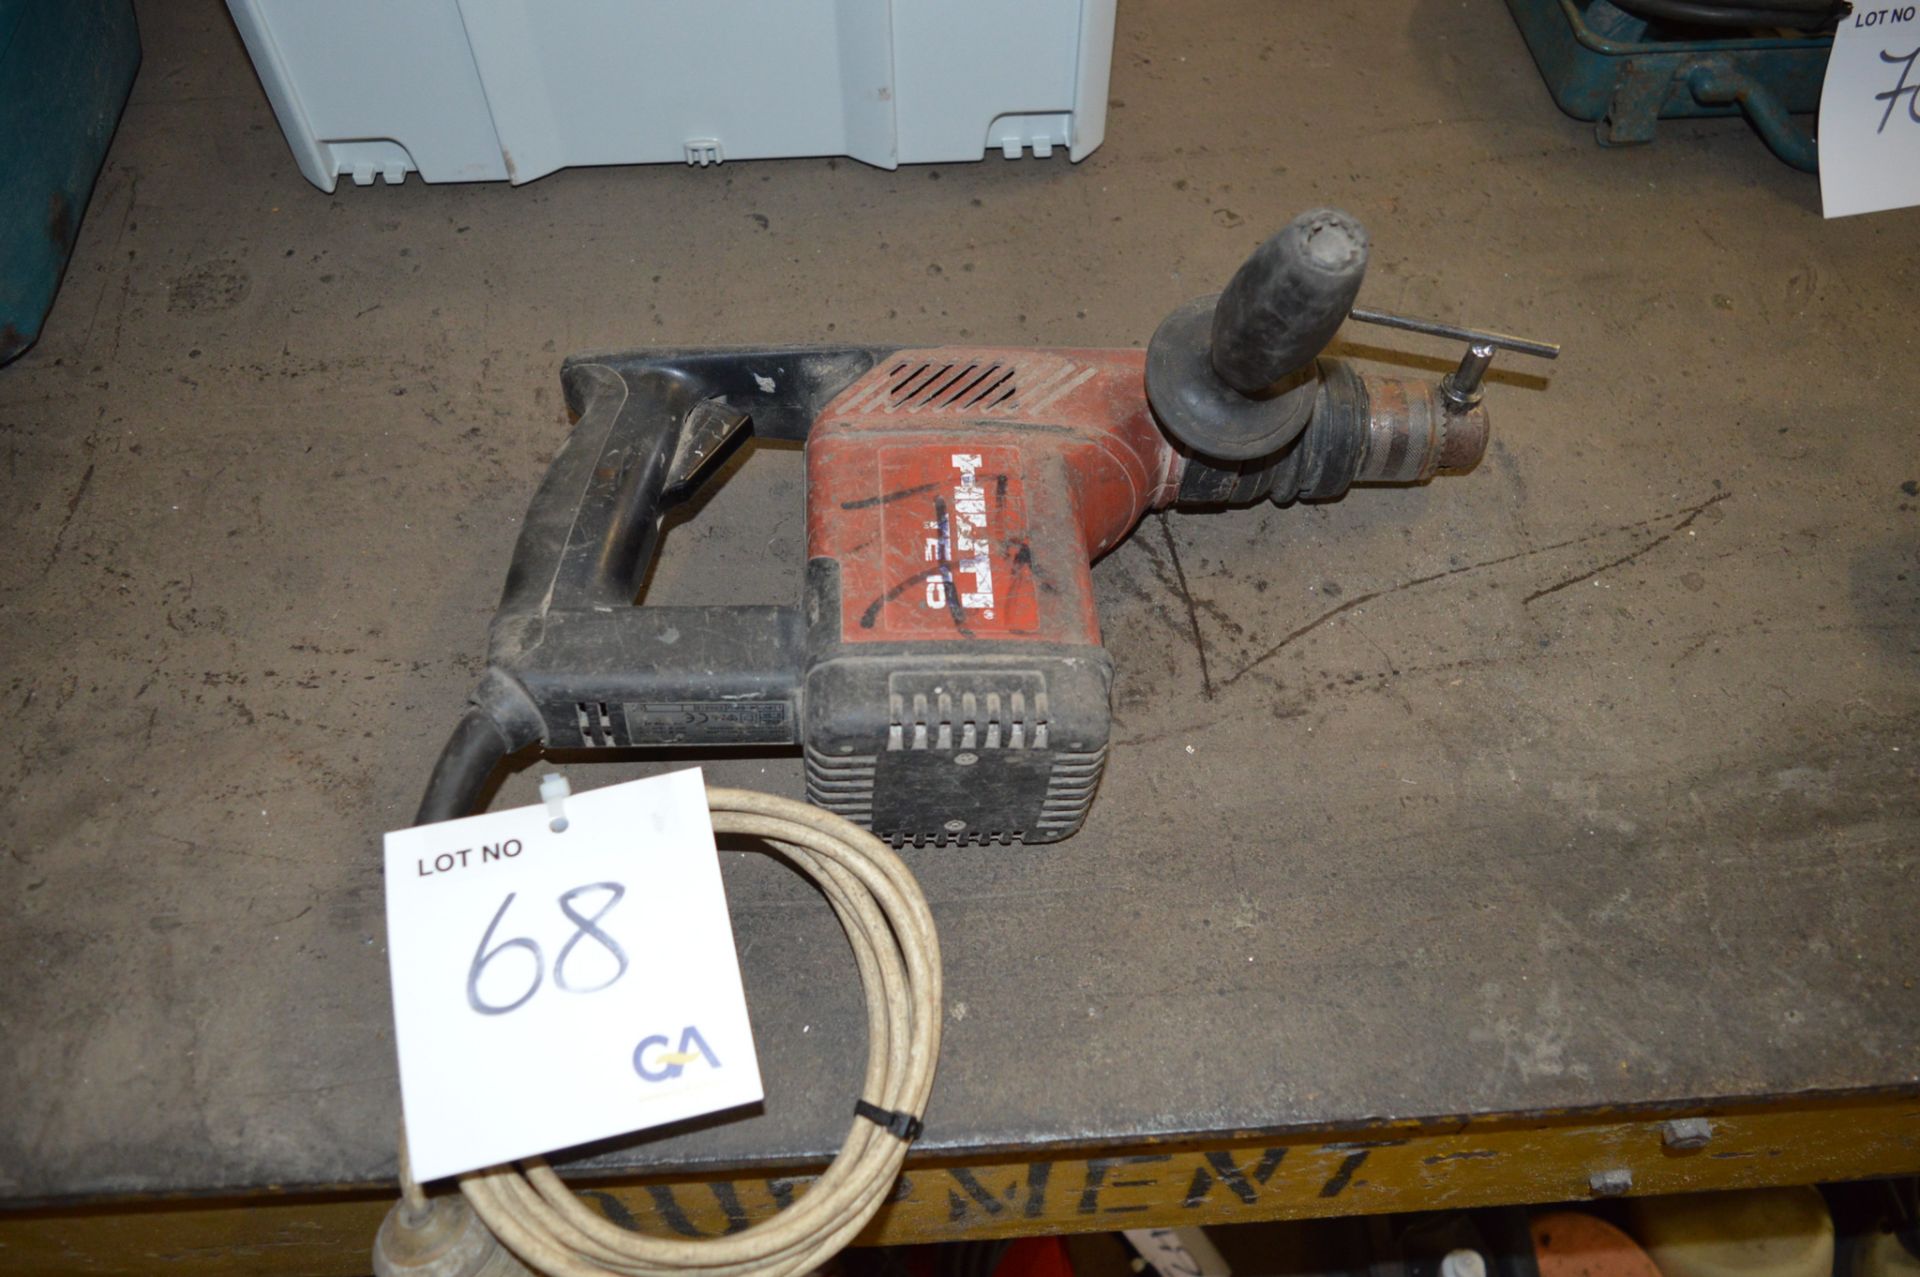 Hilti 110v rotary hammer drill Model: TE15 ** No VAT on hammer price but VAT will be charged on